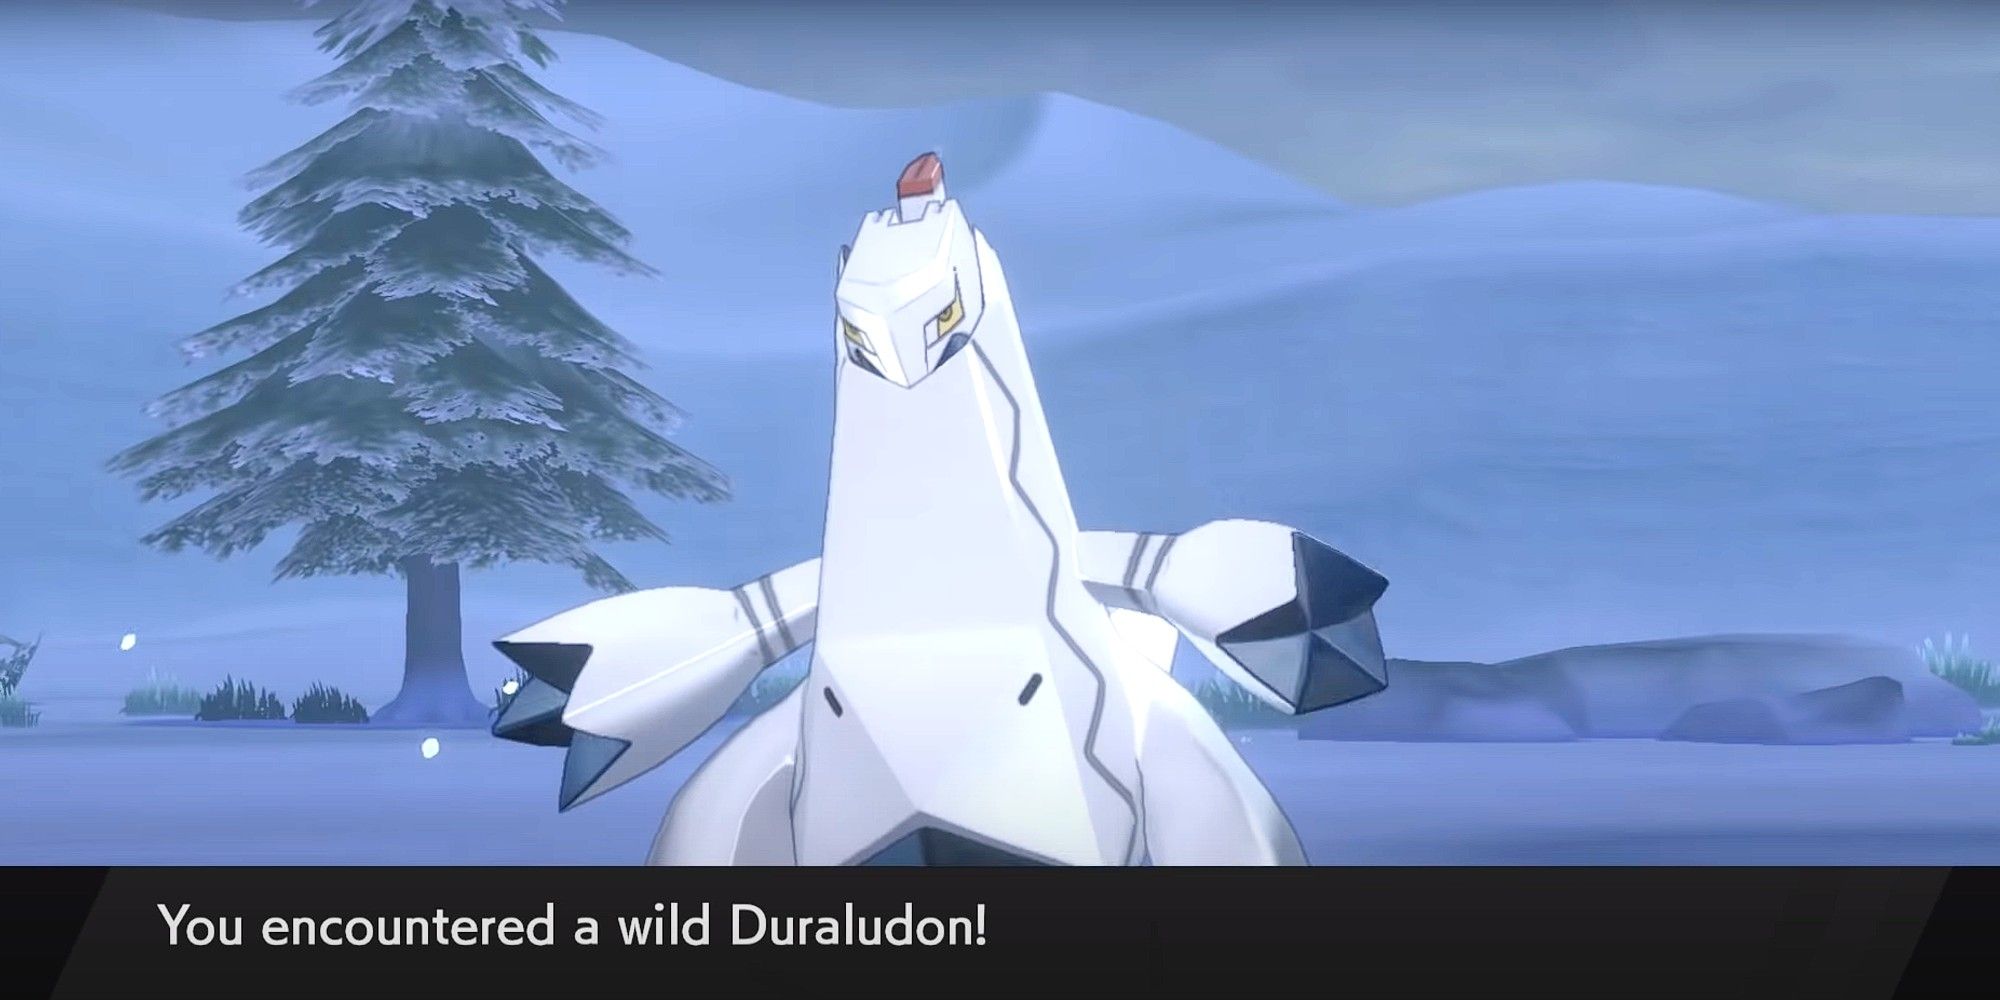 A player encounters a wild Duraludon on Route 10 in a Snowstorm in Pokemon Sword &amp; Shield